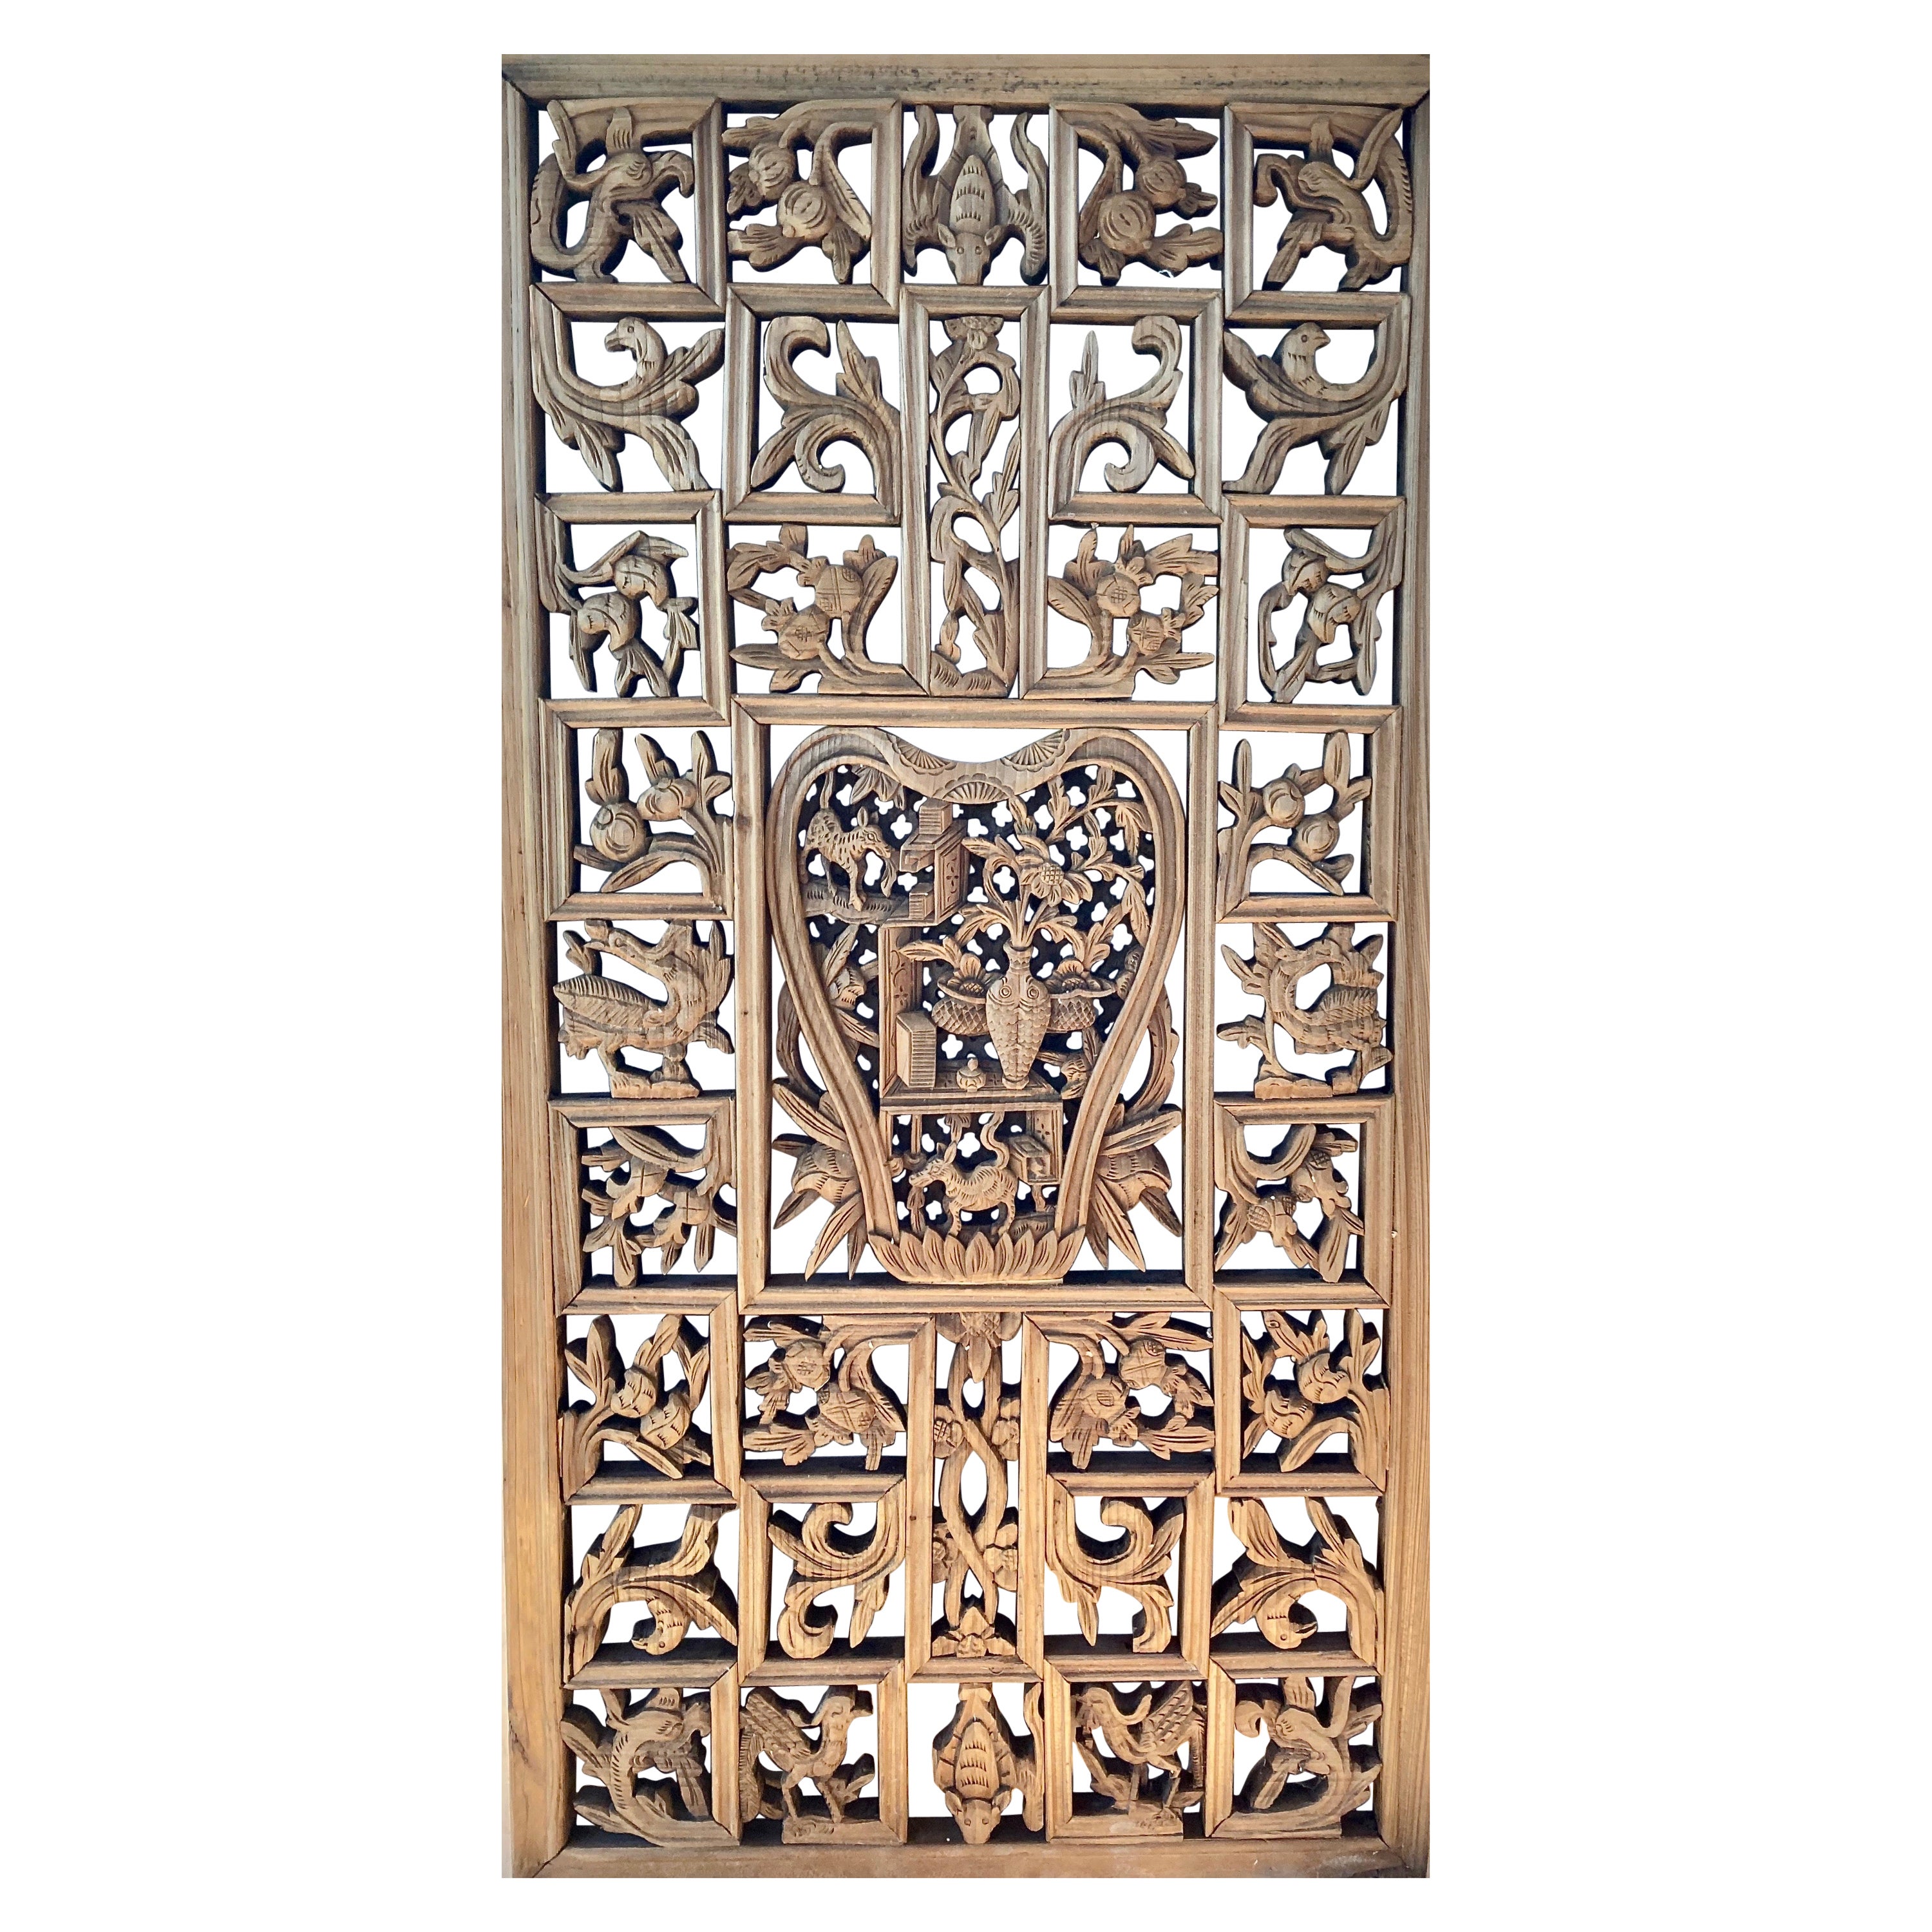 Chinese Decorative Lattice + Carved Wood Panel For Sale